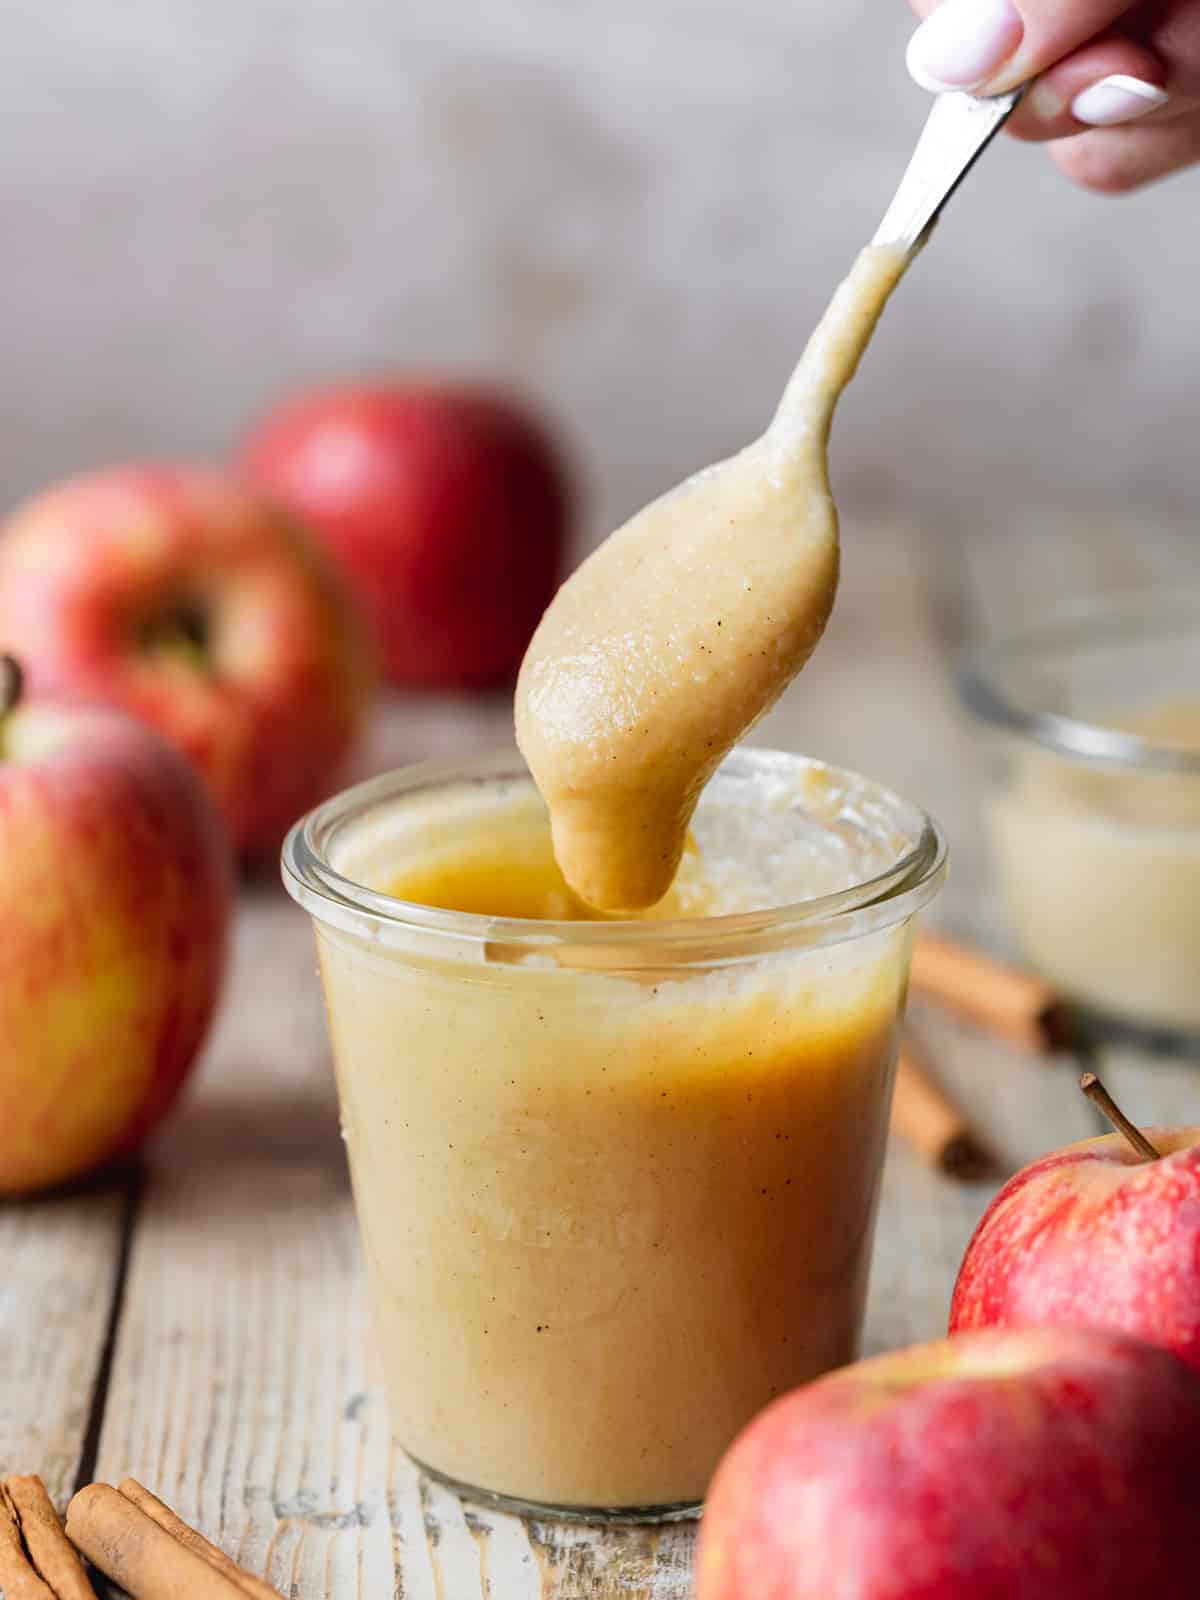 apple curd in a weck jar with a spoonful being lifted away showing the creamy consistency.